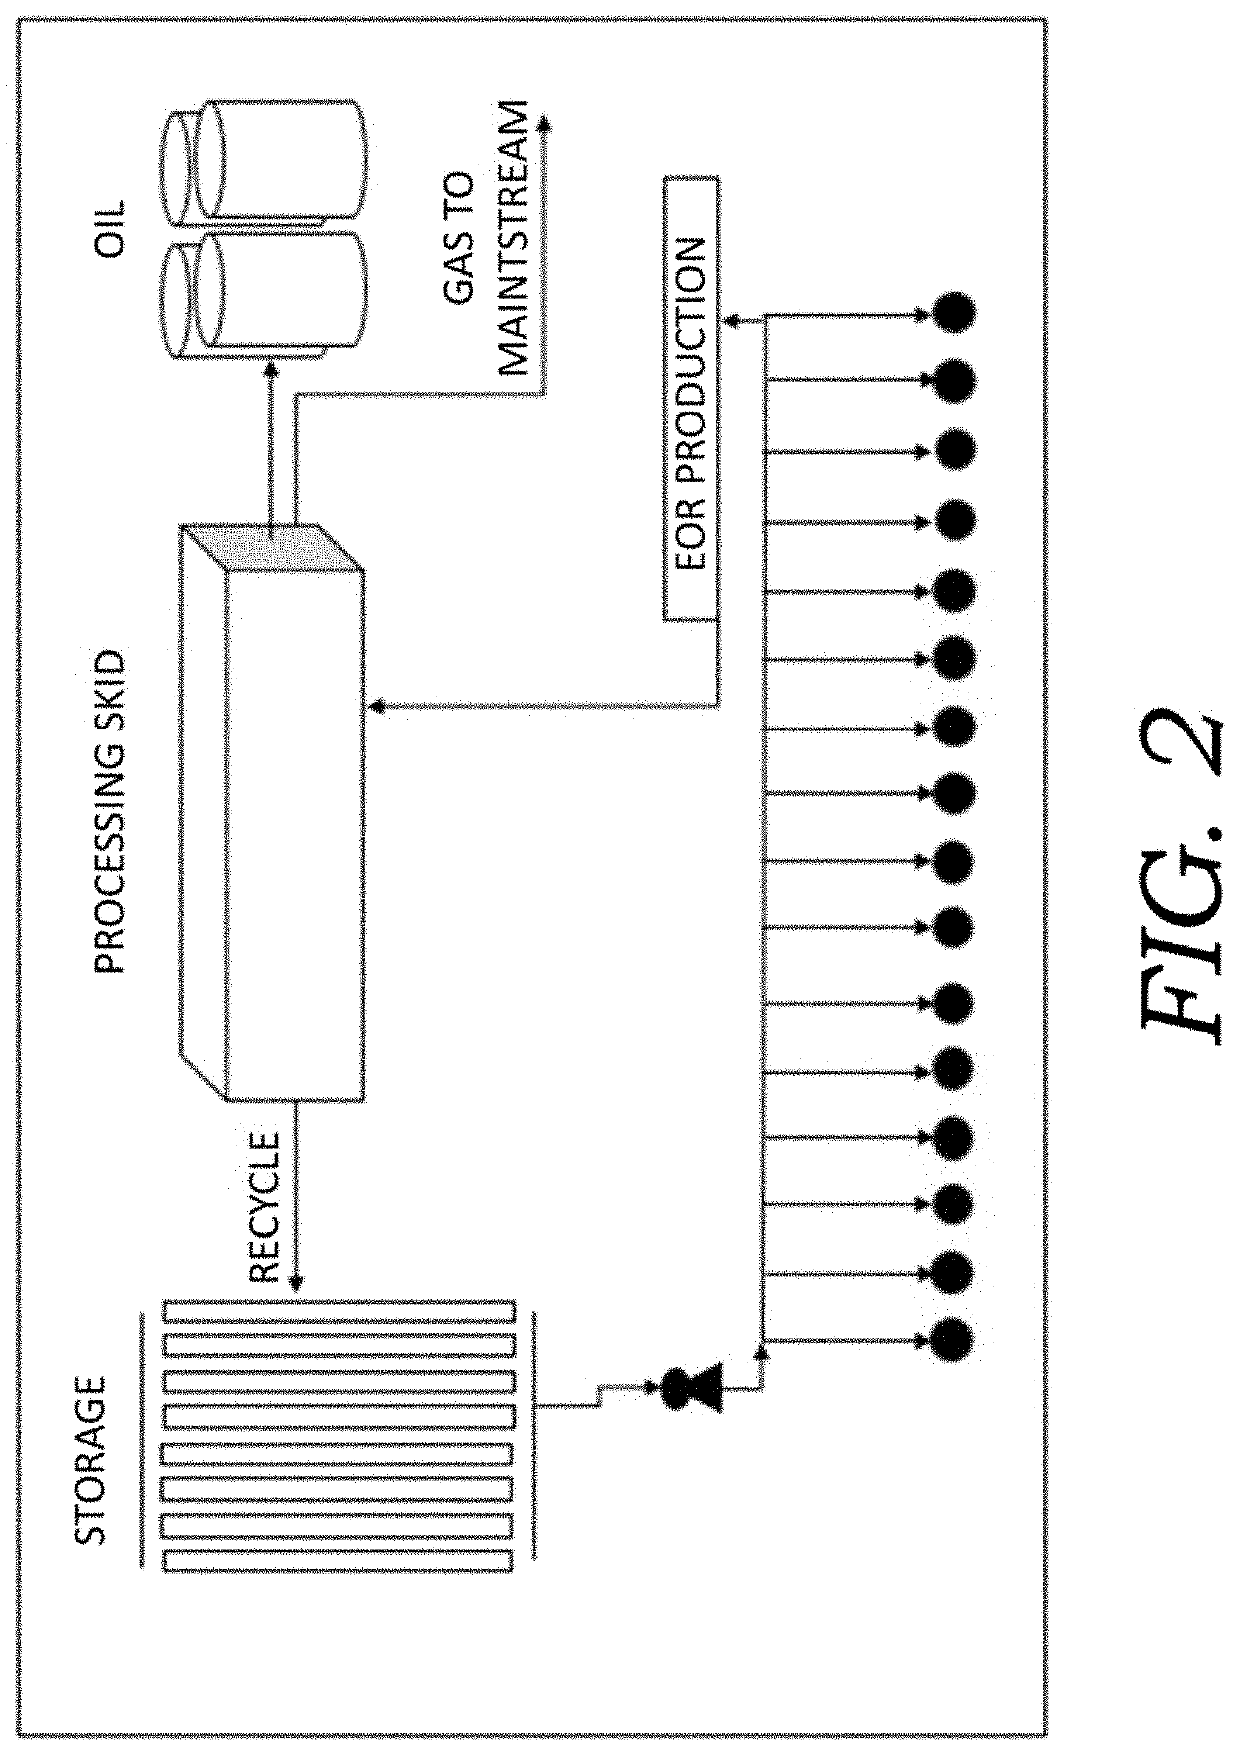 System and method for optimized production of hydrocarbons from shale oil reservoirs via cyclic injection